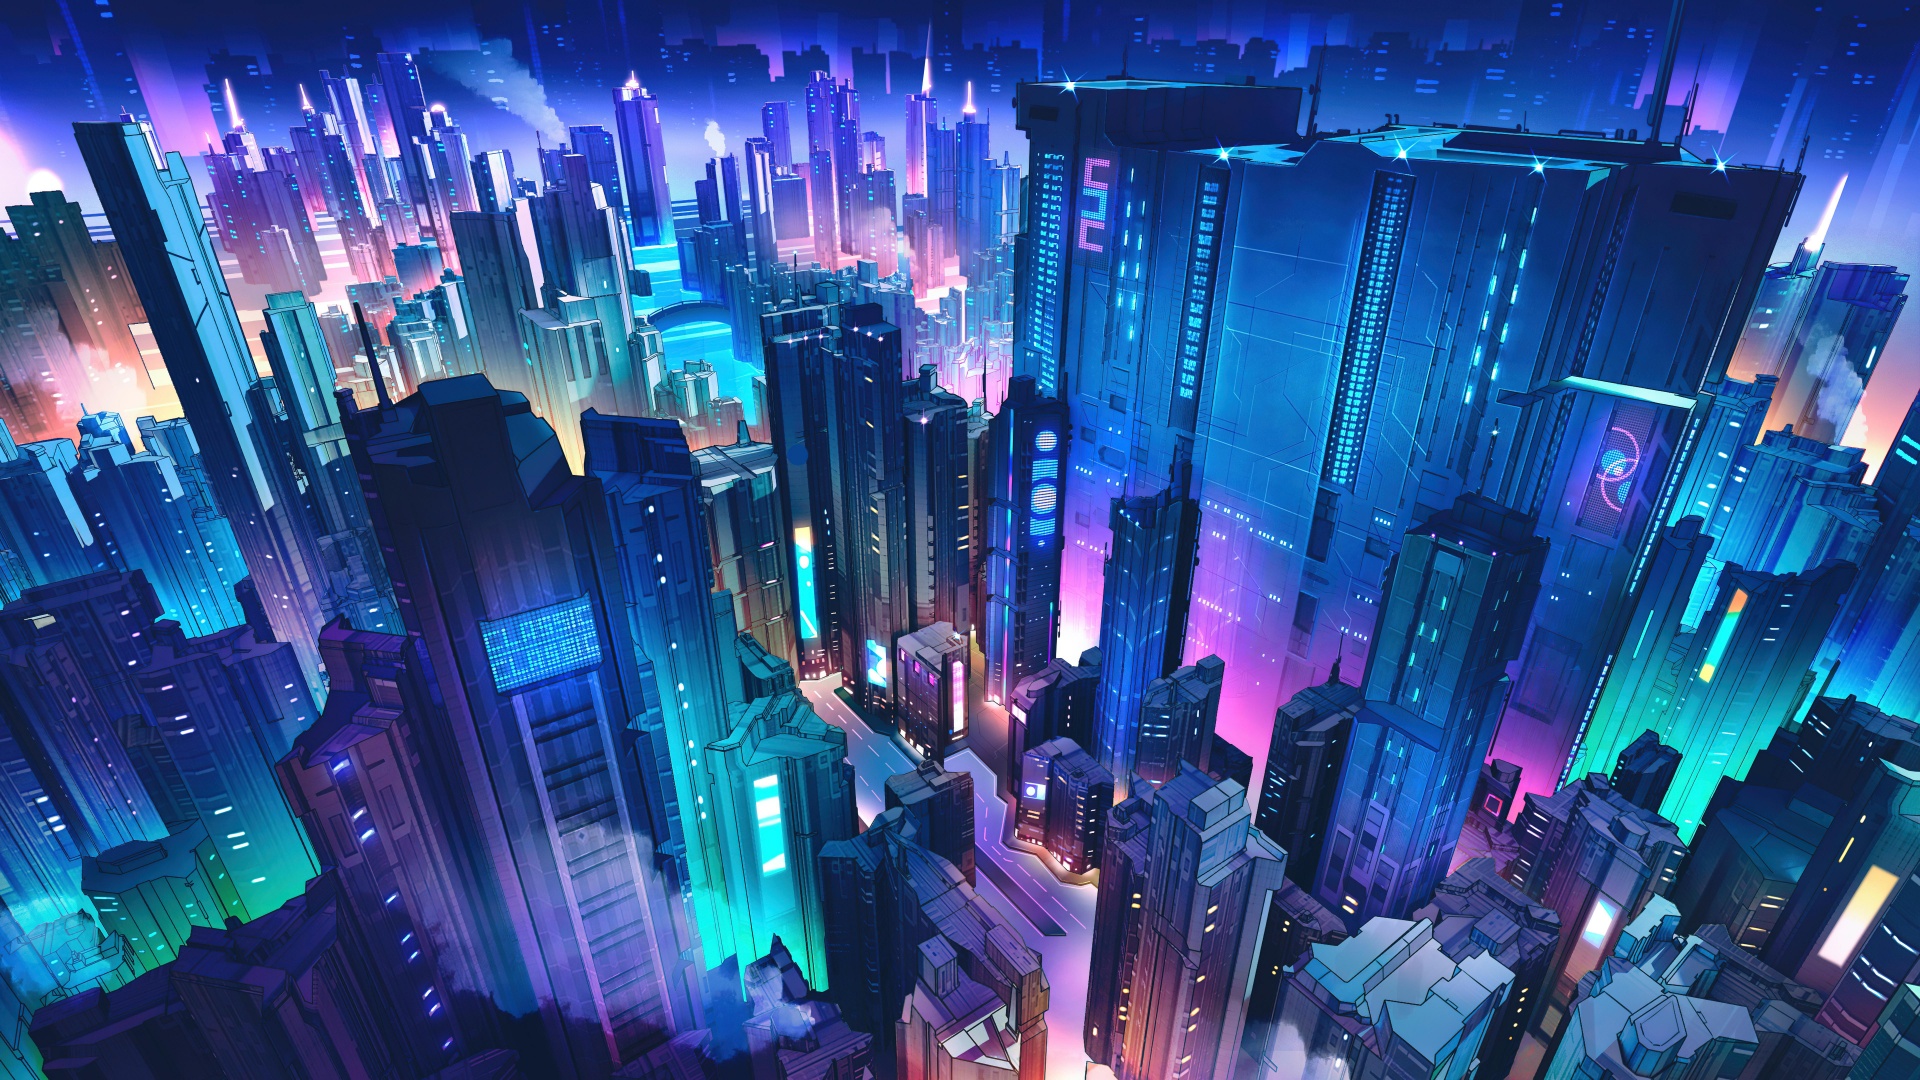 Page 45 | Neon City Wallpaper Images - Free Download on Freepik